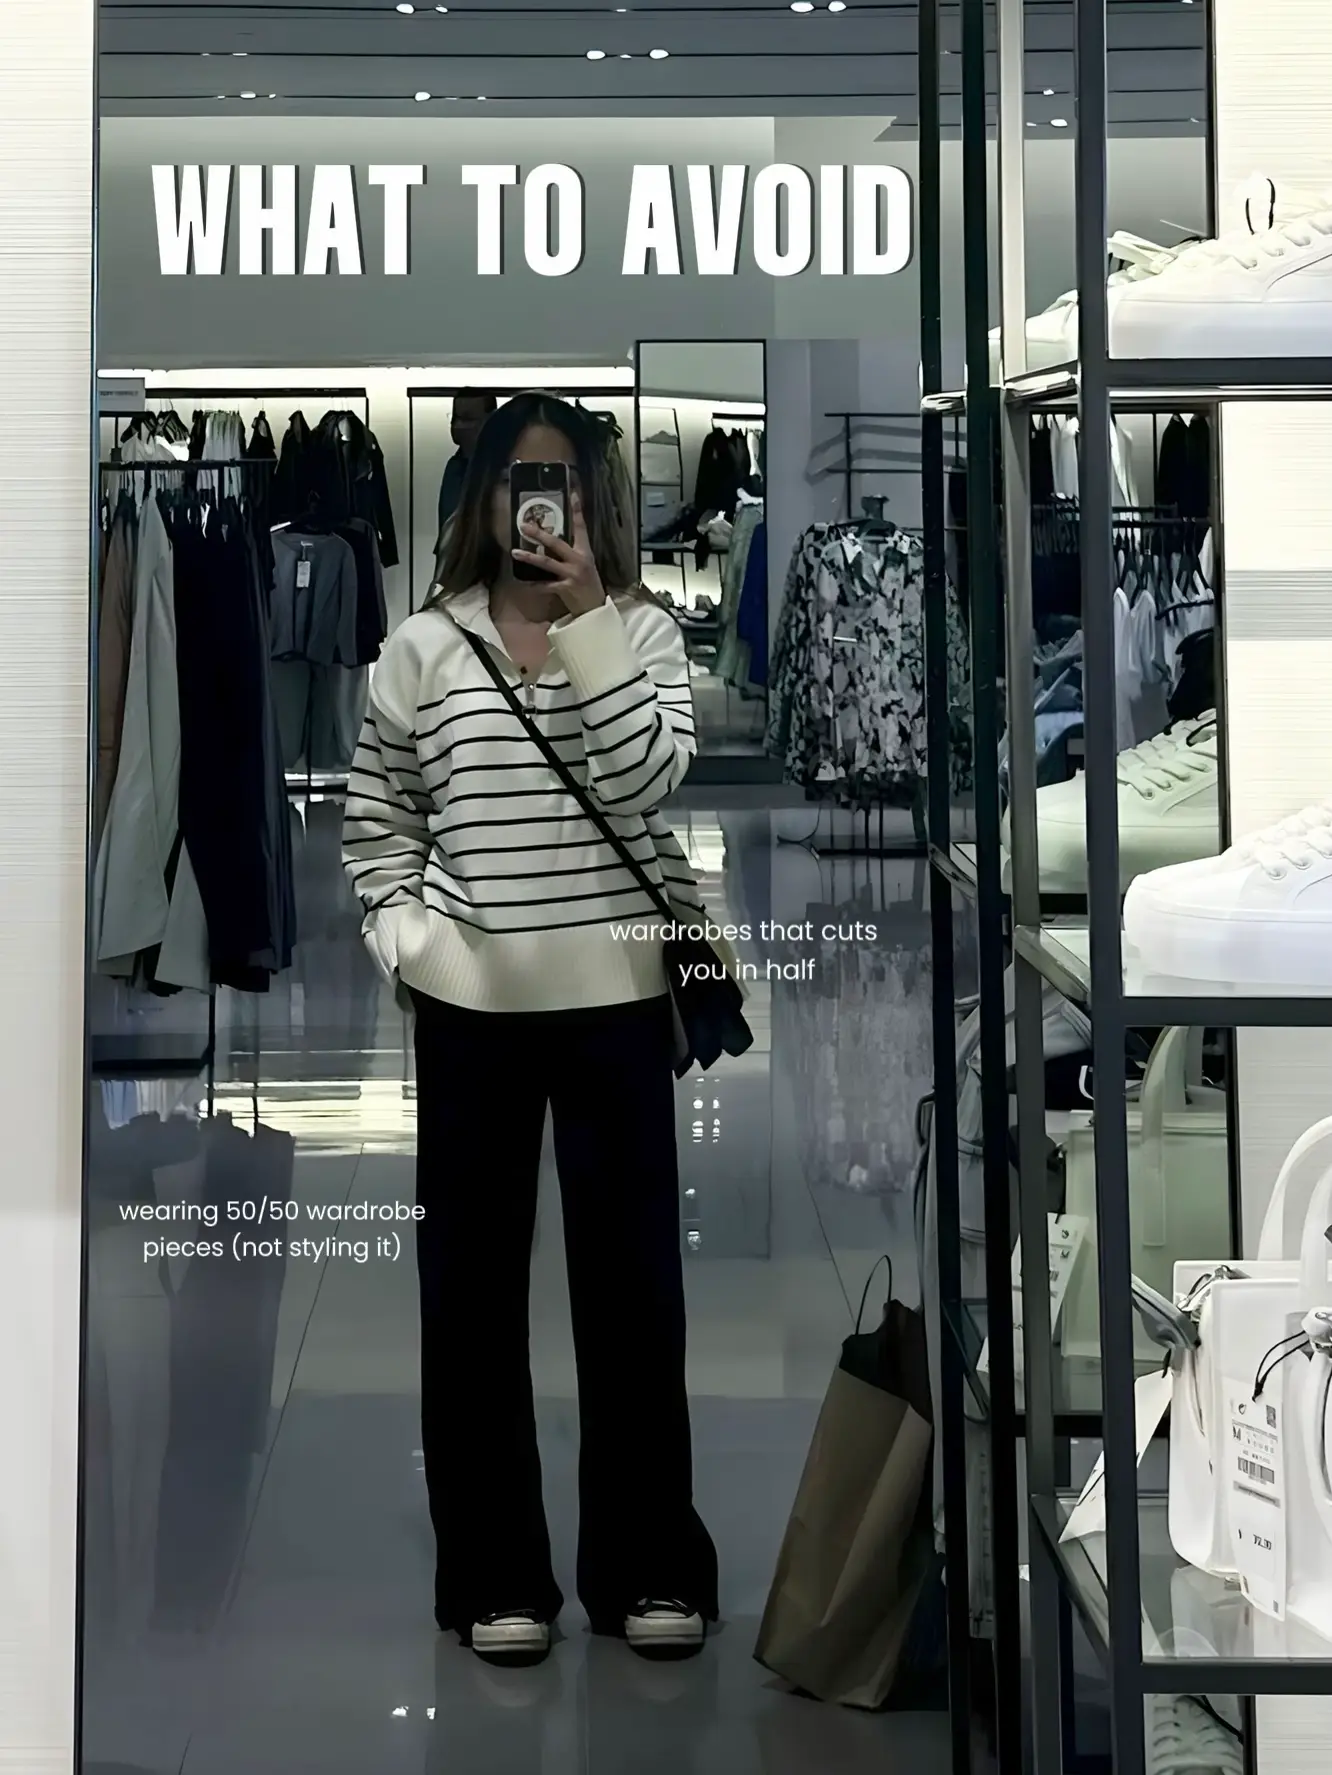  A woman taking a selfie in a store.